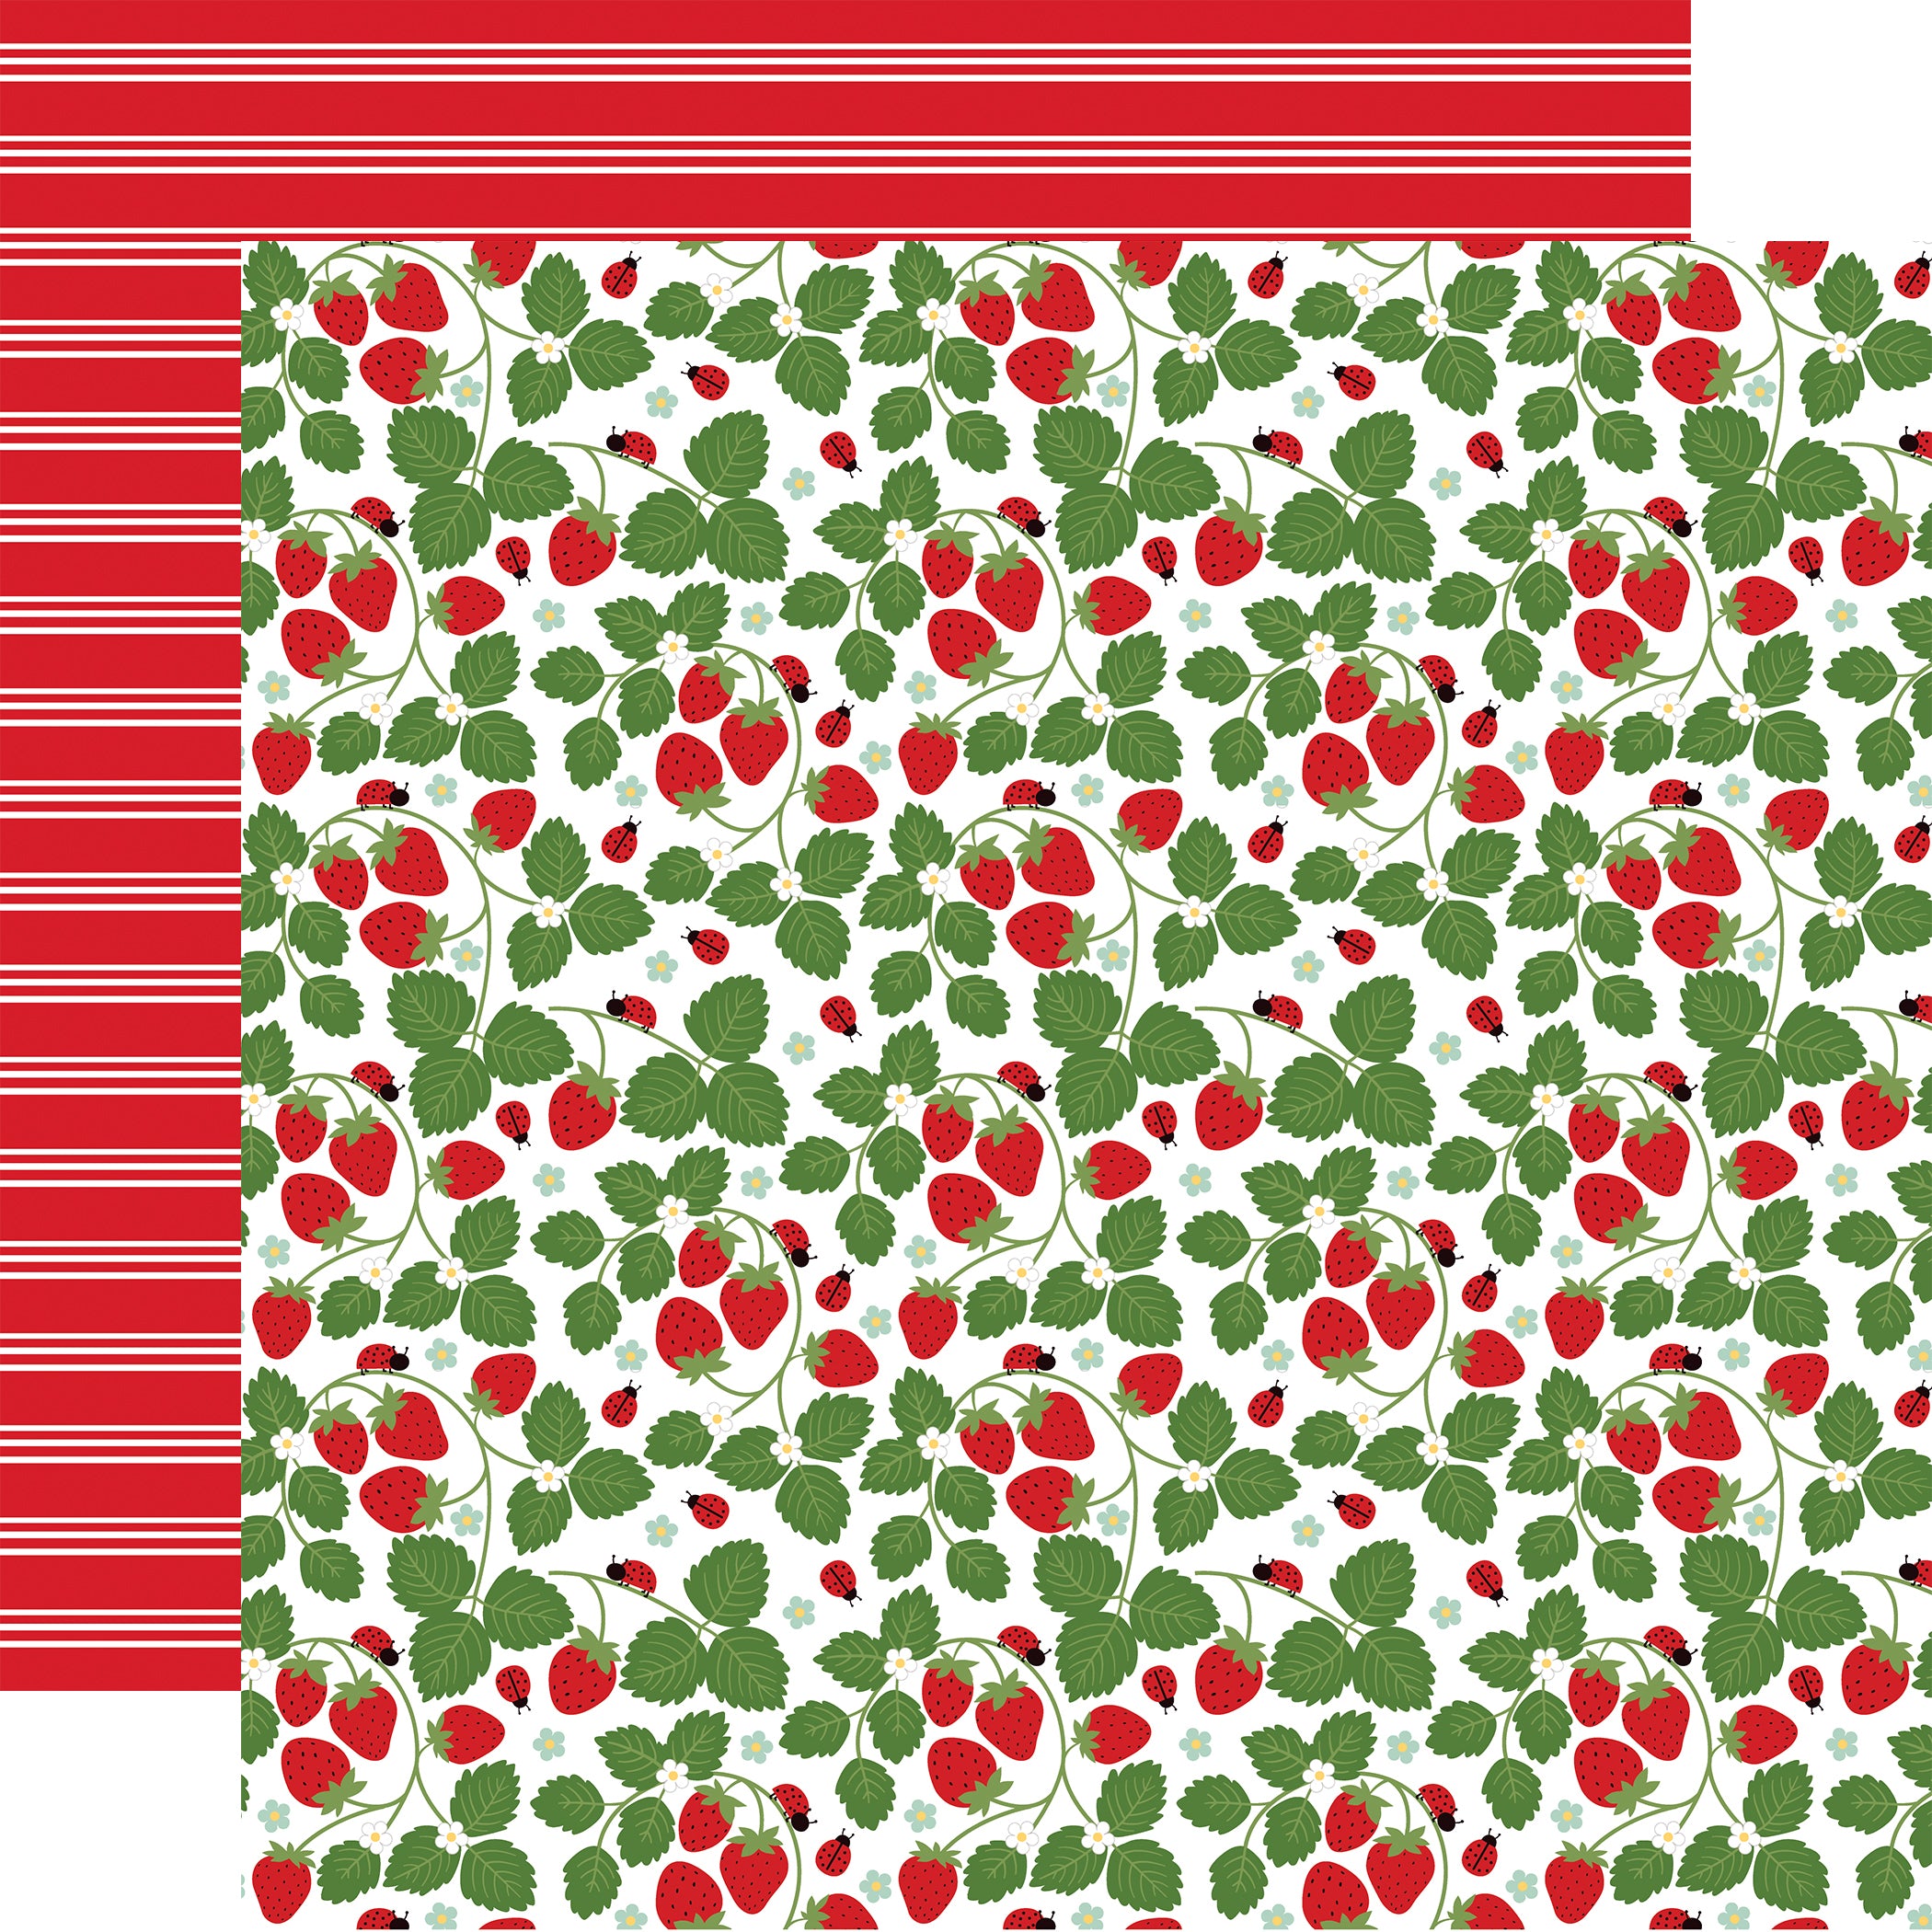 Little Ladybug Collection Sweet Strawberries 12 x 12 Double-Sided Scrapbook Paper by Echo Park Paper